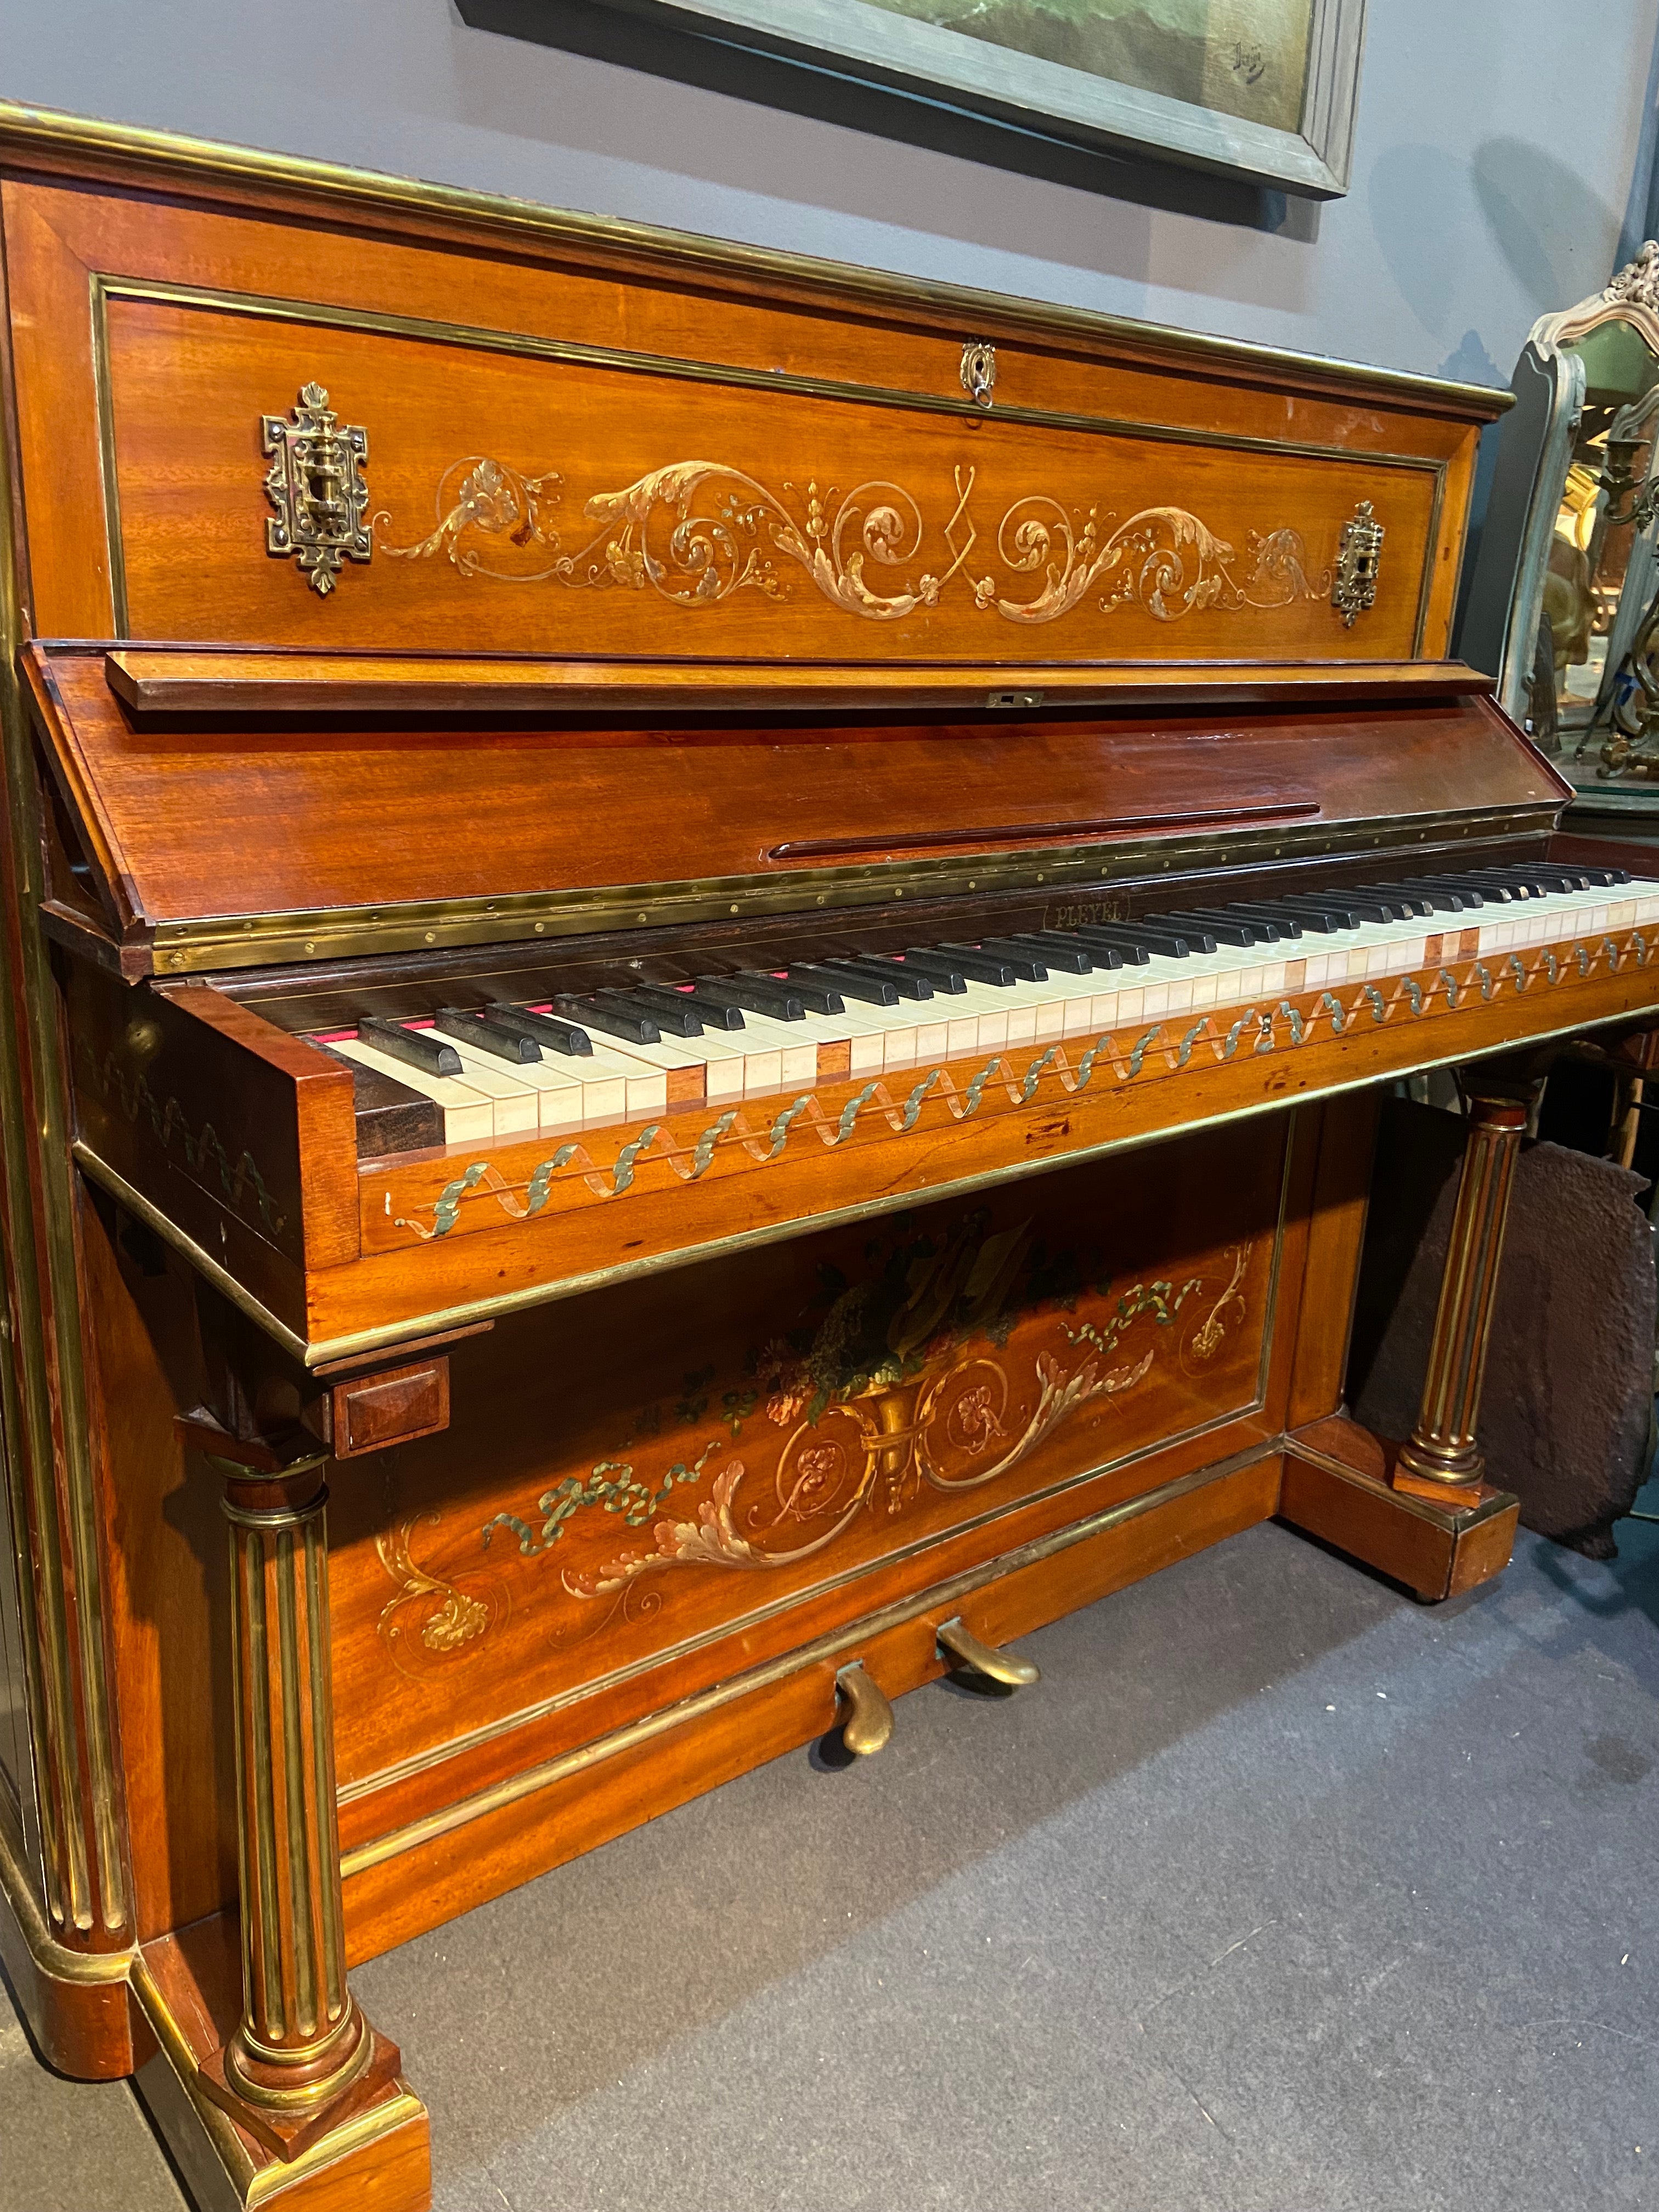 This rare upright piano was made by Pleyel in France in September 1871 according to the Pleyel Archives found at Musée de la Musique.
The natural wood cabinet is beautifully decorated with hand painted floral garlands. The piano sides are square